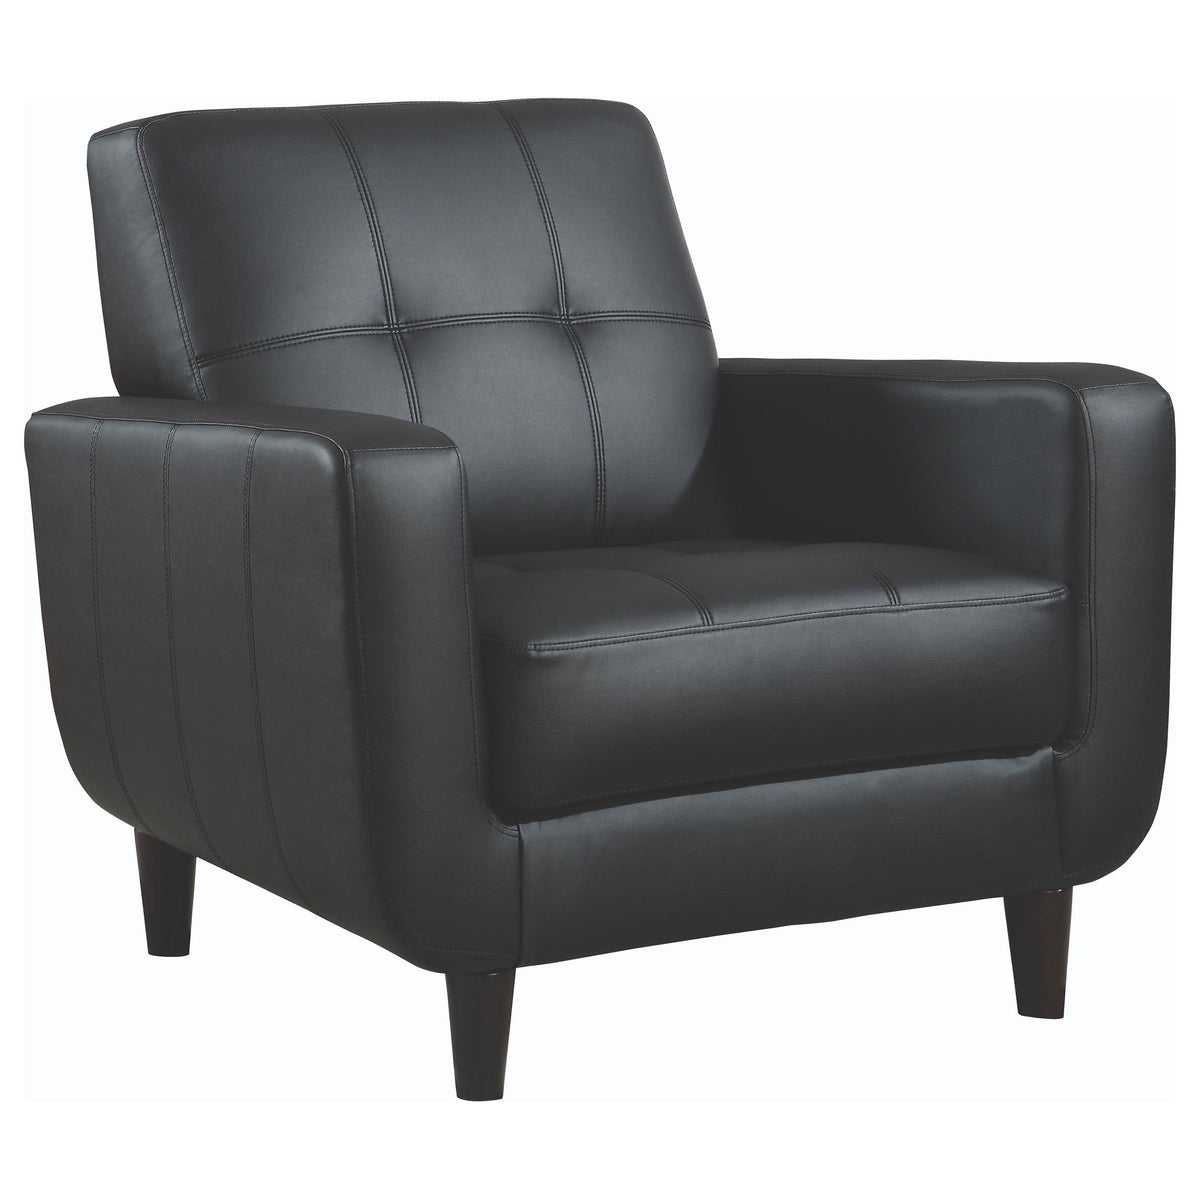 Aaron Padded Seat Accent Chair Black  Las Vegas Furniture Stores